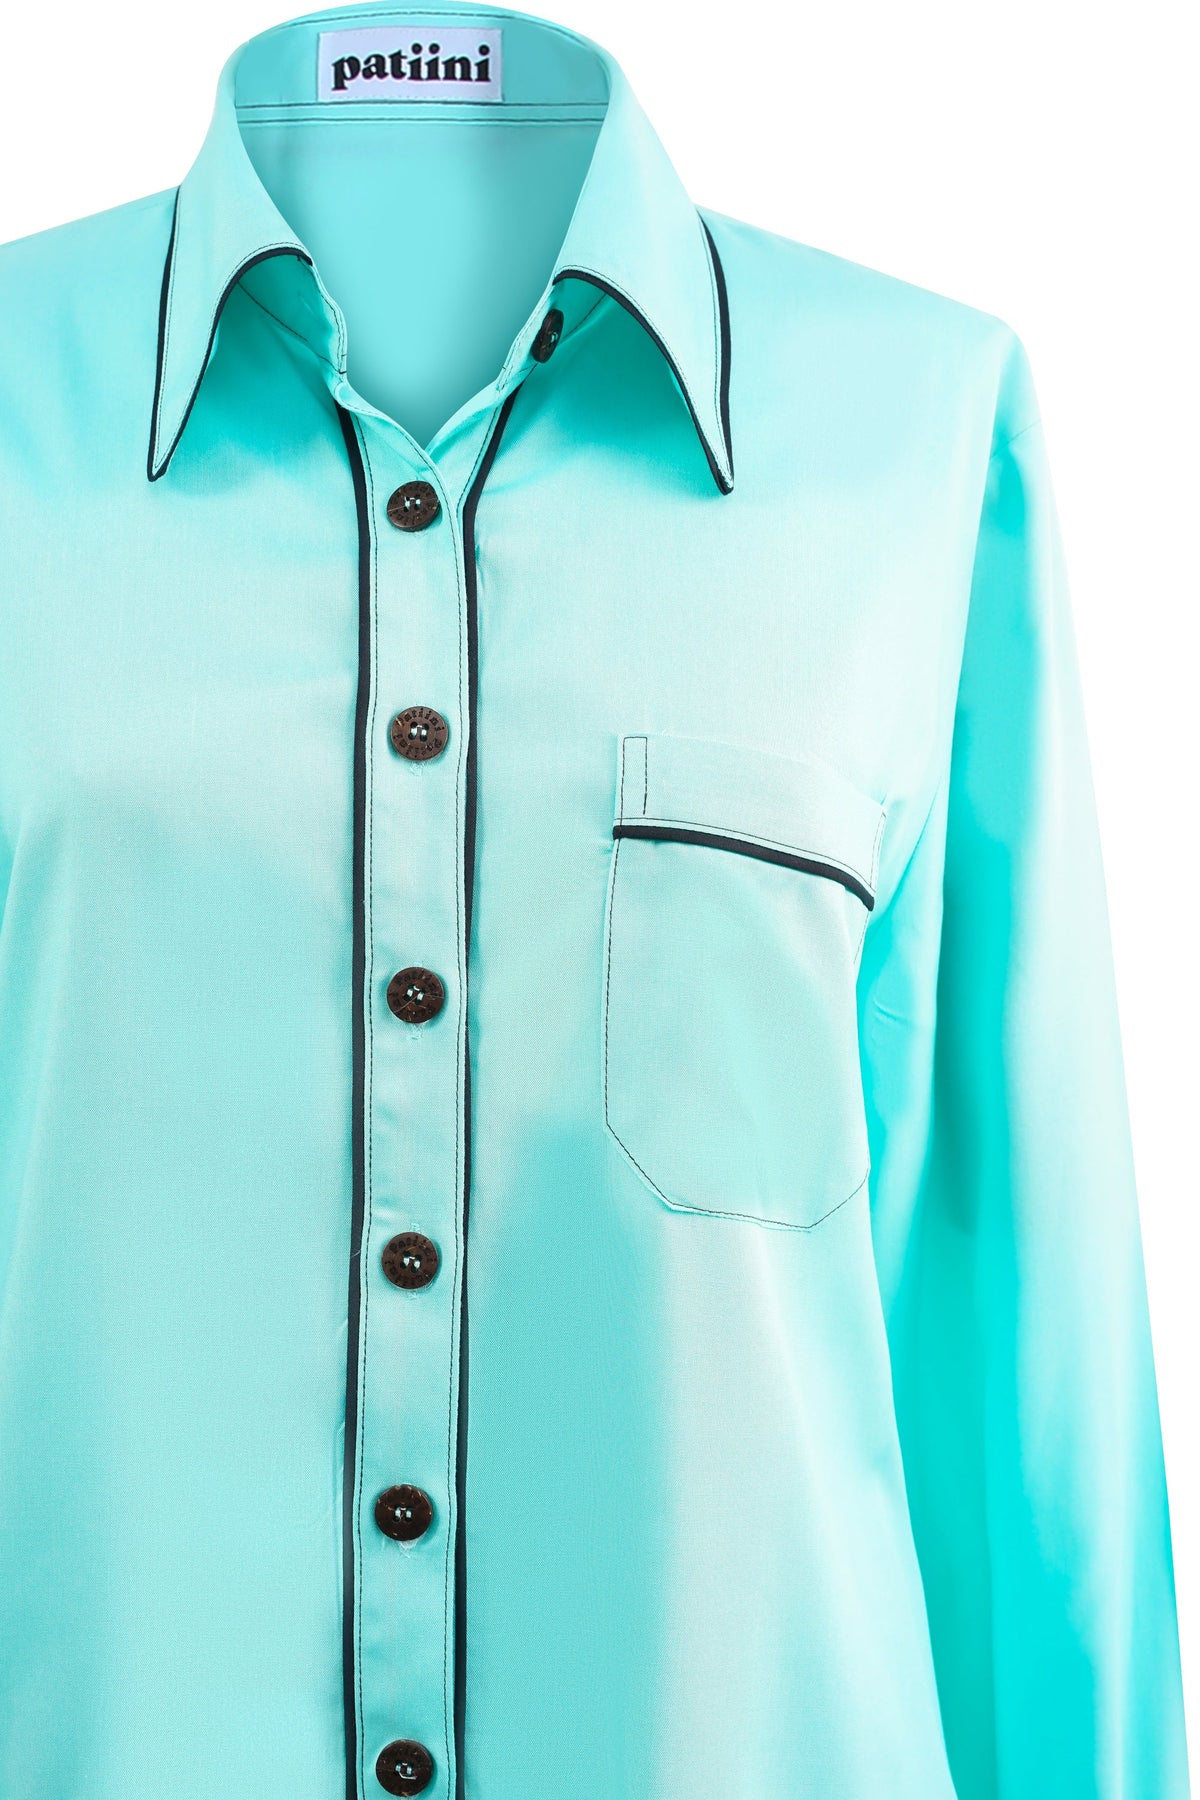 Close-up of a teal button-down shirt with coconut shell buttons.